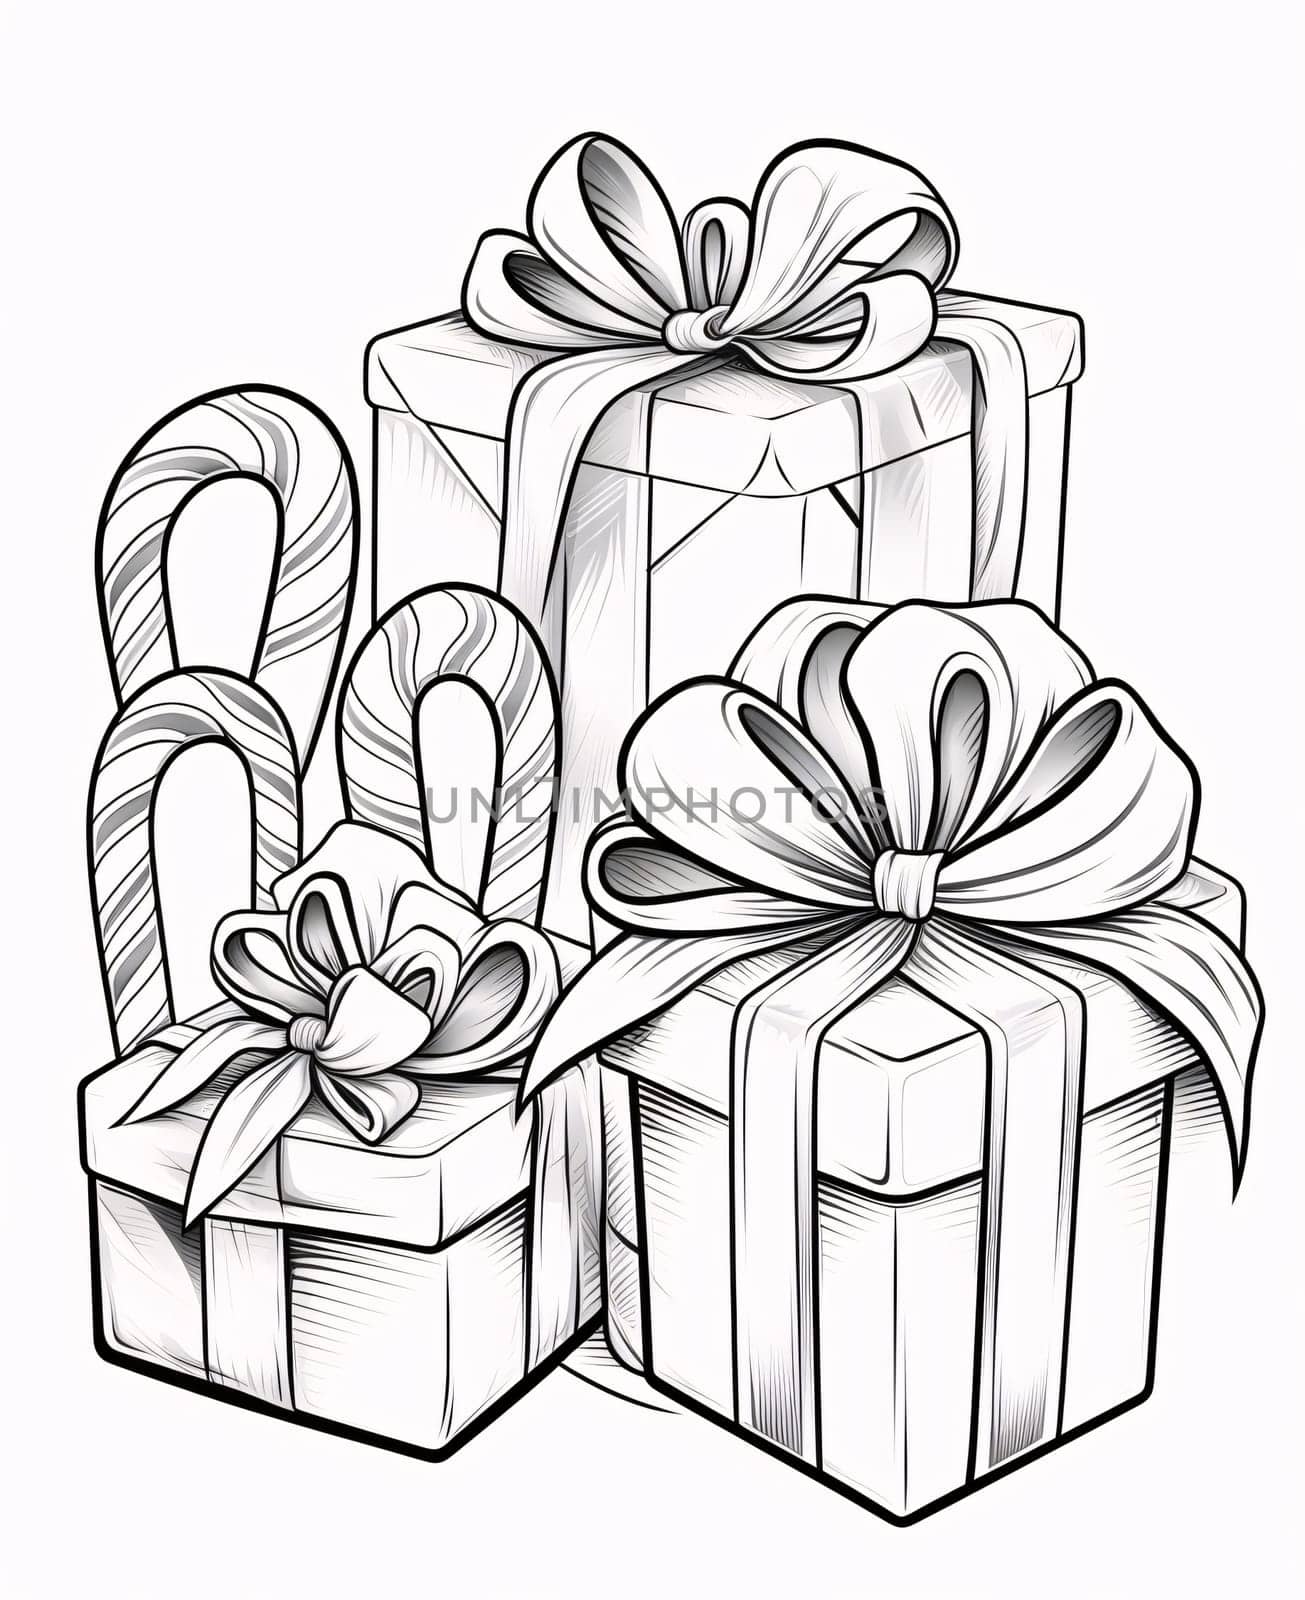 Black and white coloring card: gifts with bows and sticks. Gifts as a day symbol of present and love. A time of falling in love and love.